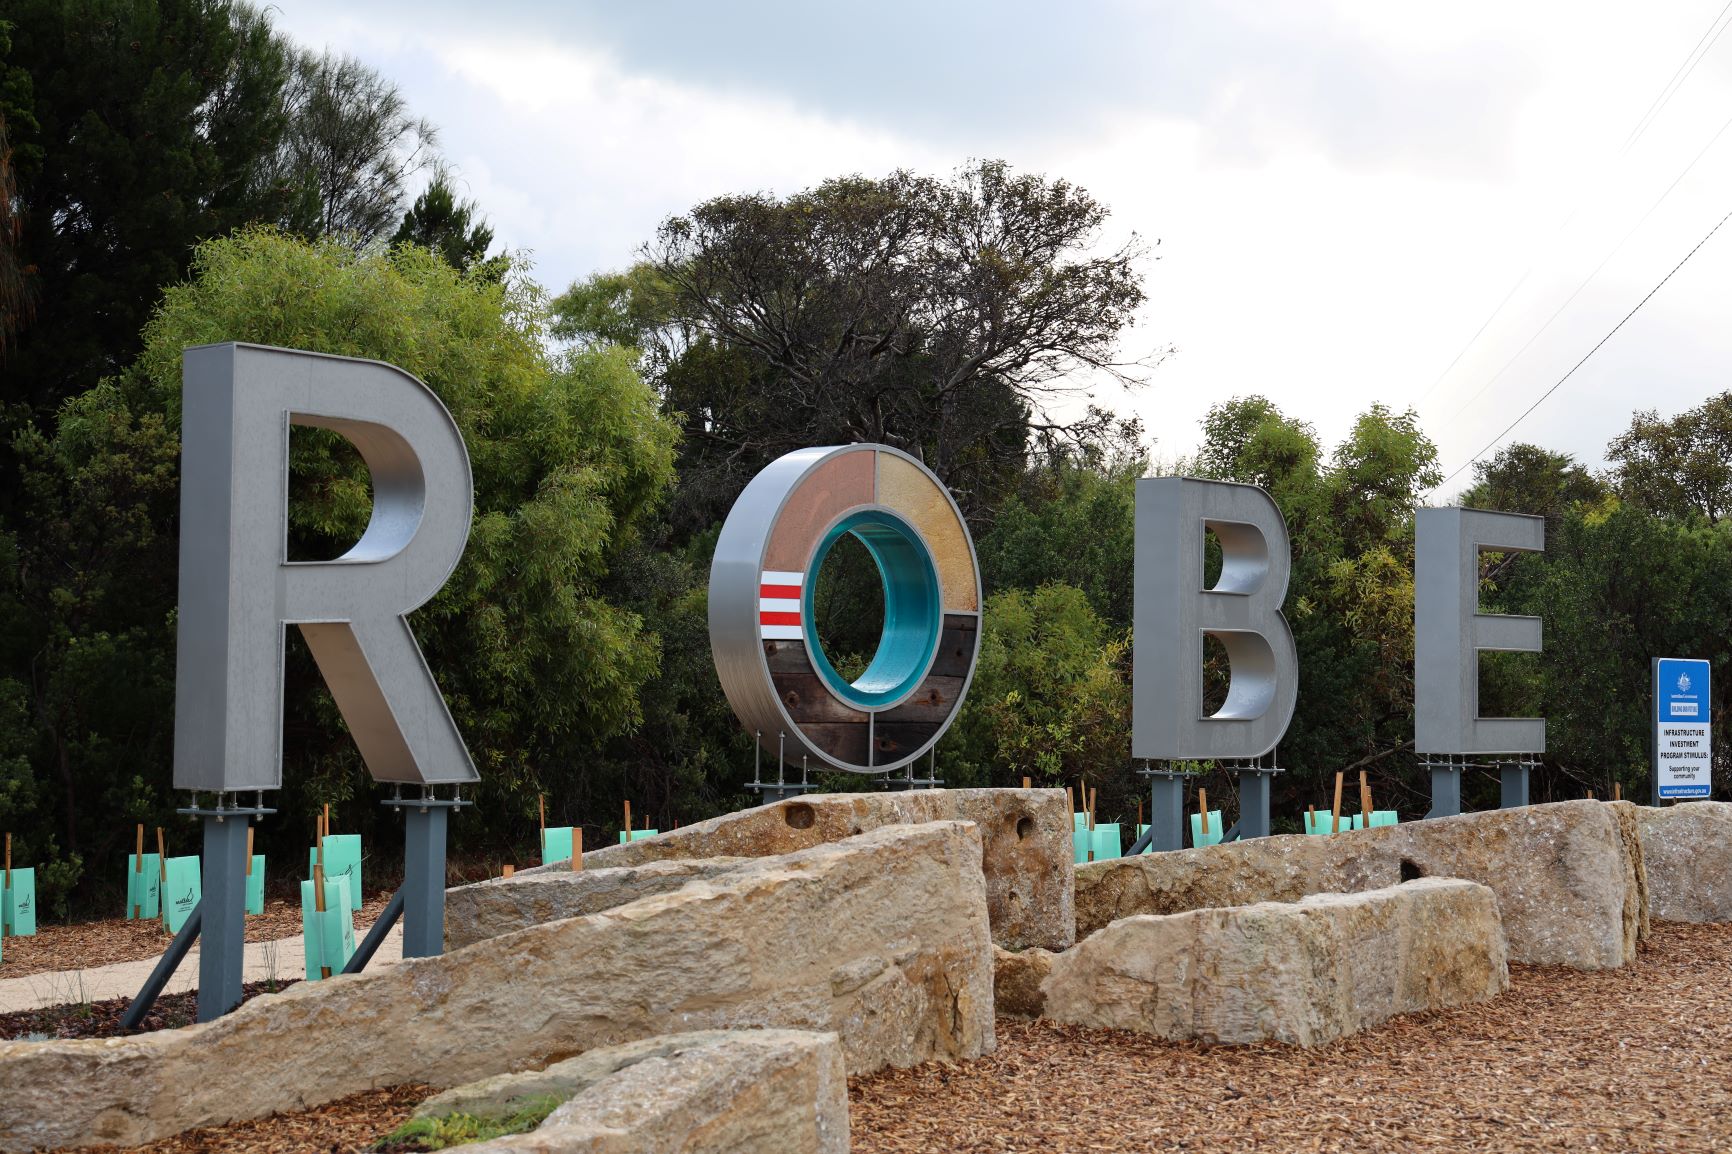 DISTRICT COUNCIL OF ROBE RECEIVES LOCAL ROADS AND COMMUNITY INFRASTRUCTURE FUNDING